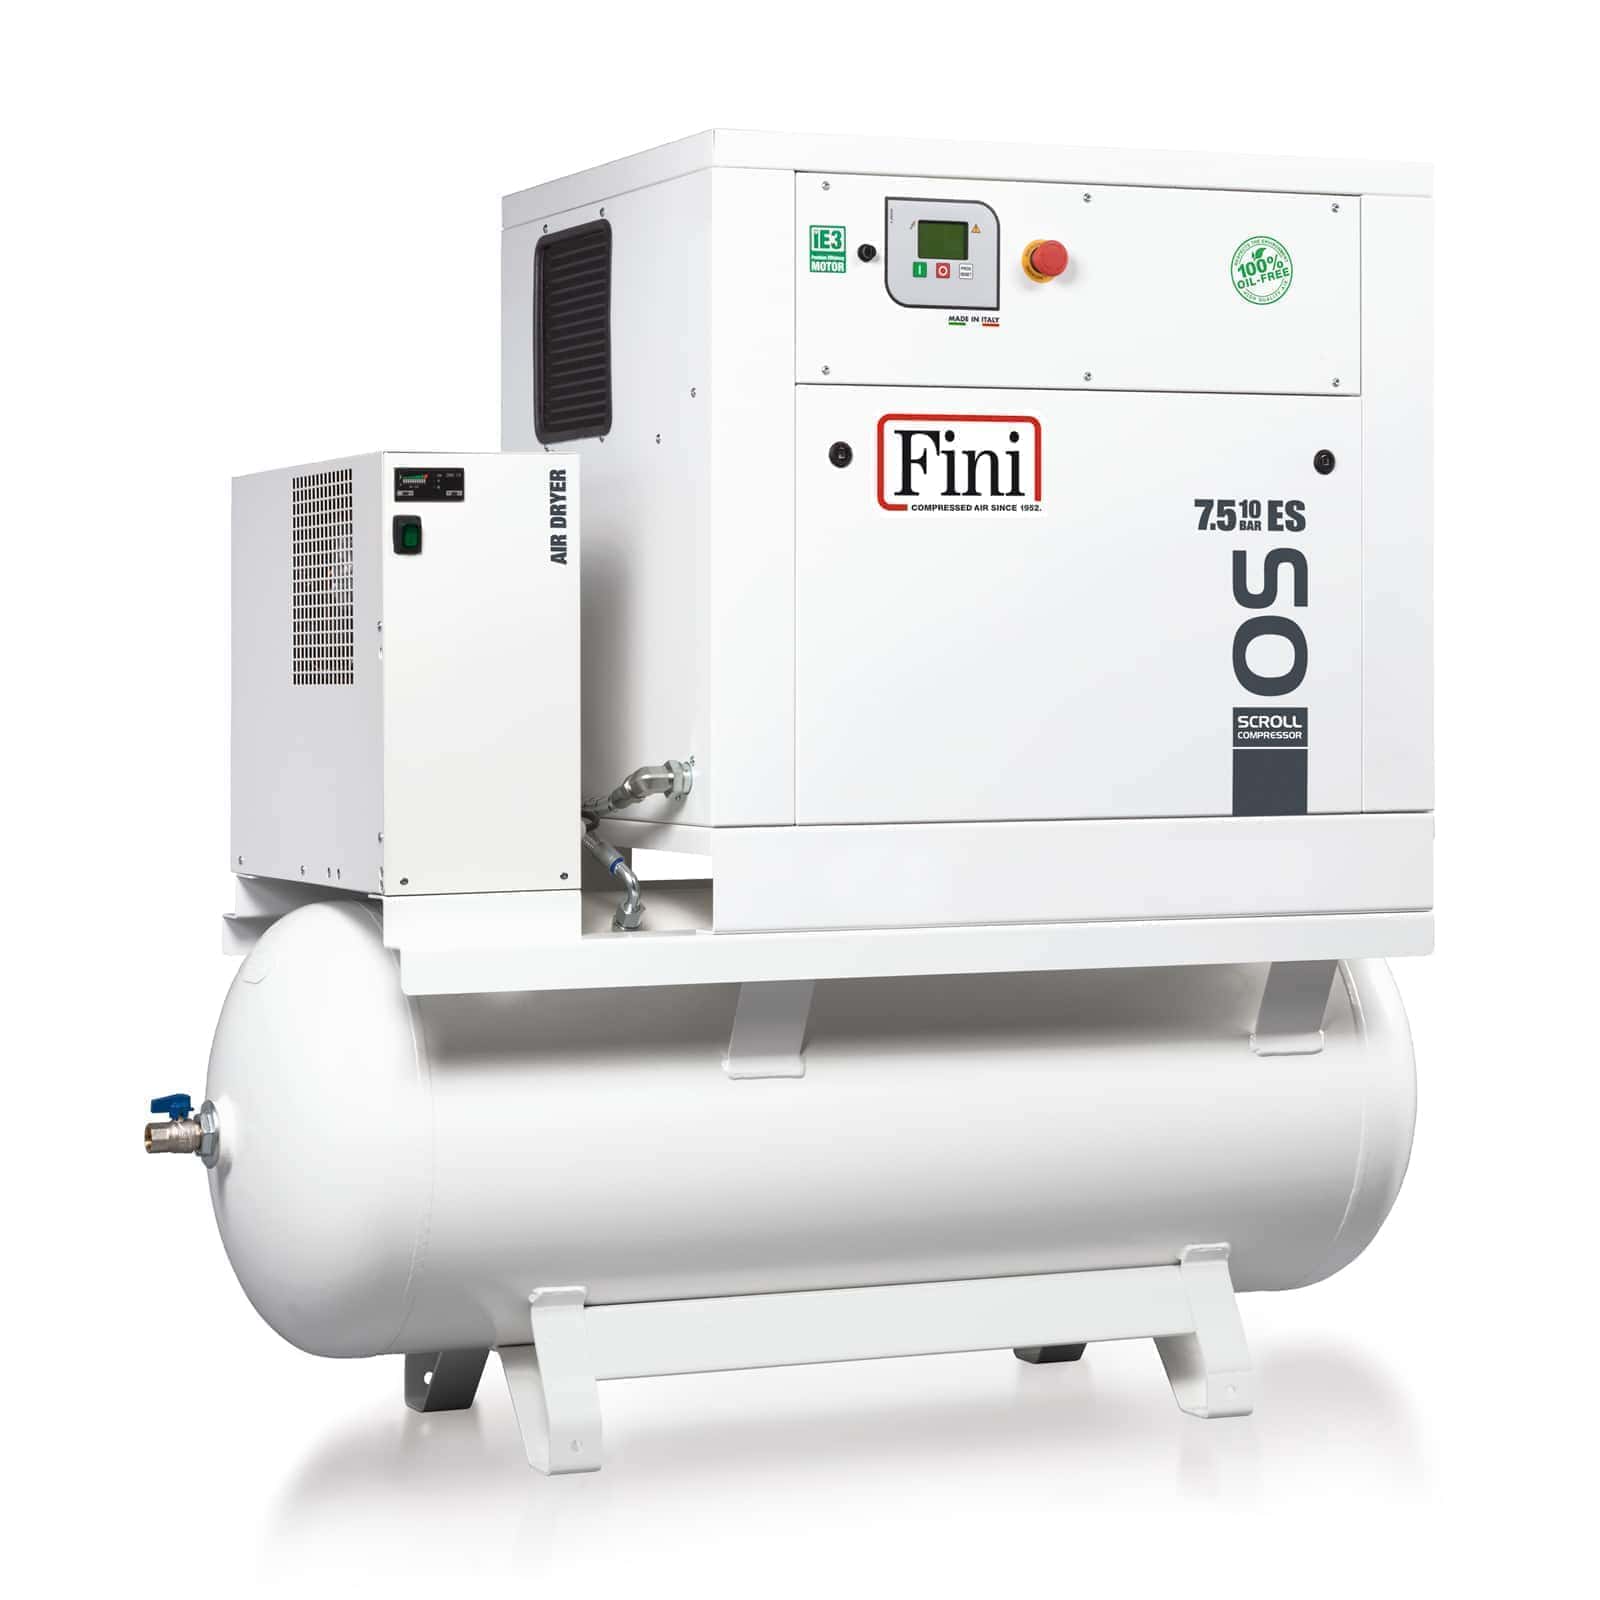 OS 7.5-08-500 ES Oil-free compressor with spiral Scroll technology, complete with tank and dryer.